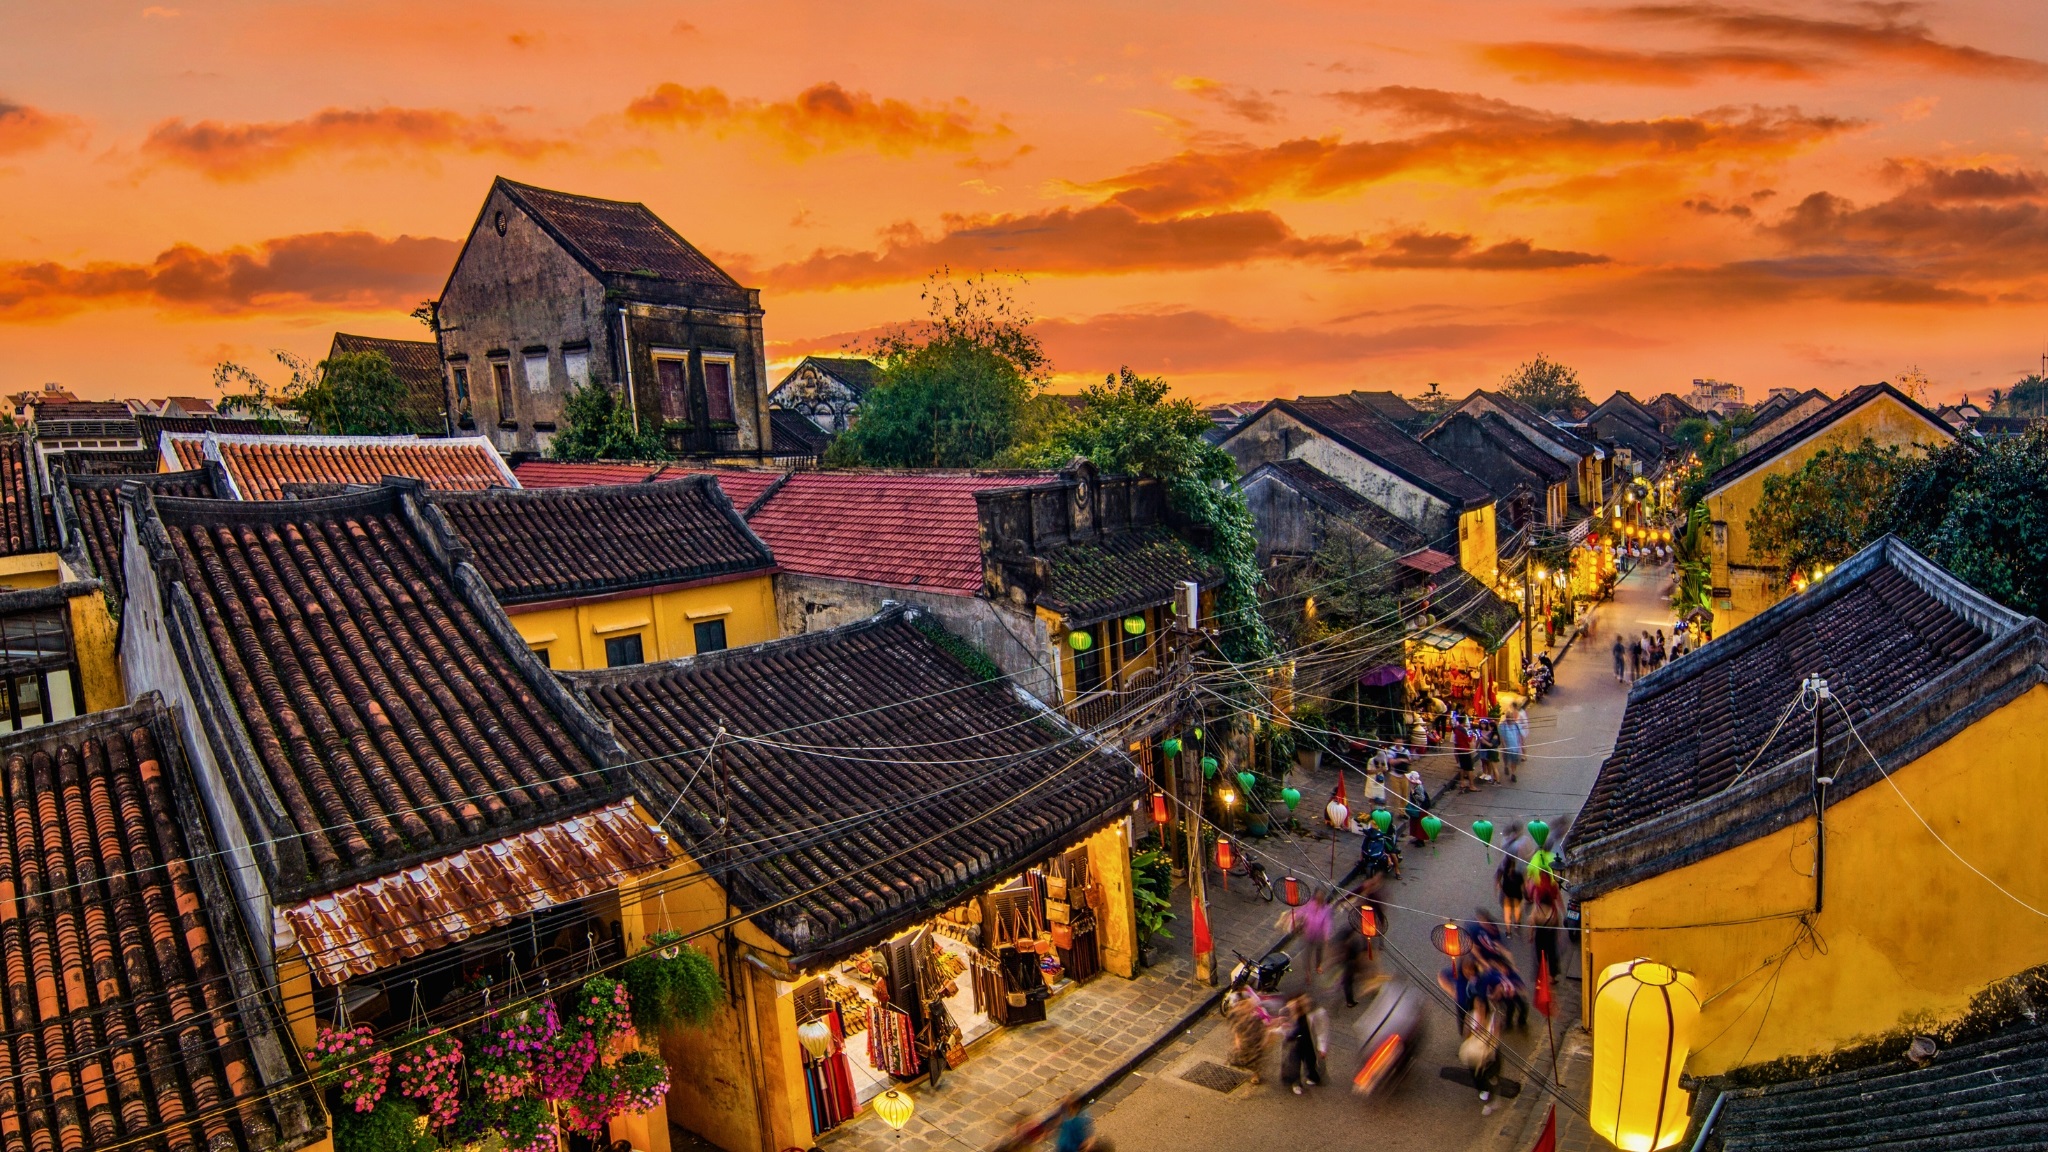 Hoi An Ancient Town A Southeast Asian Trading Port In The Past